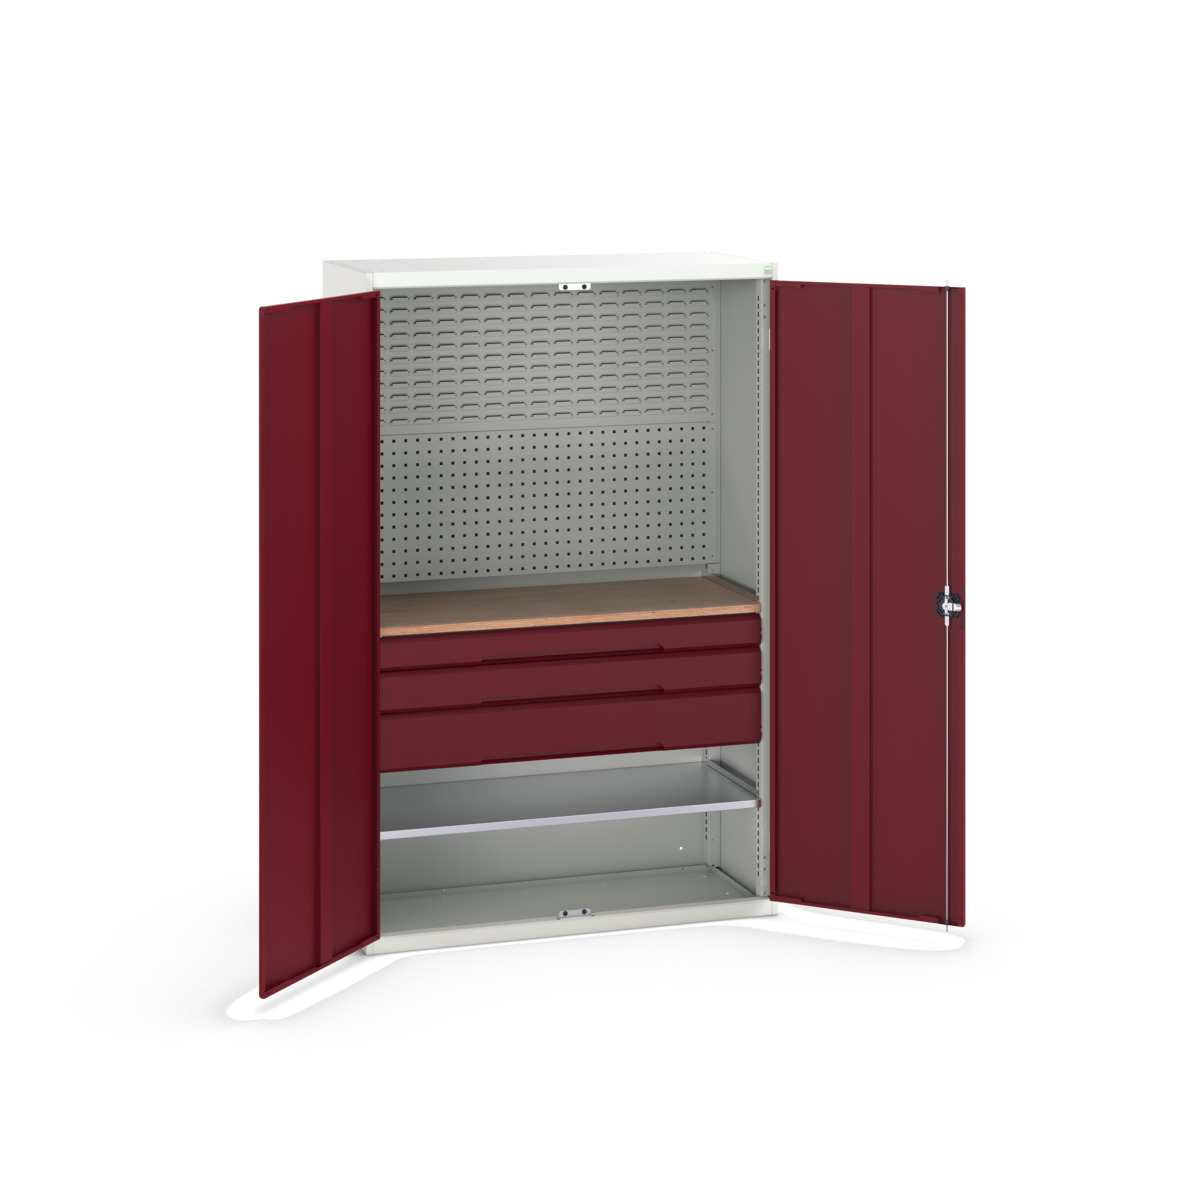 16926594.24 - verso kitted cupboard